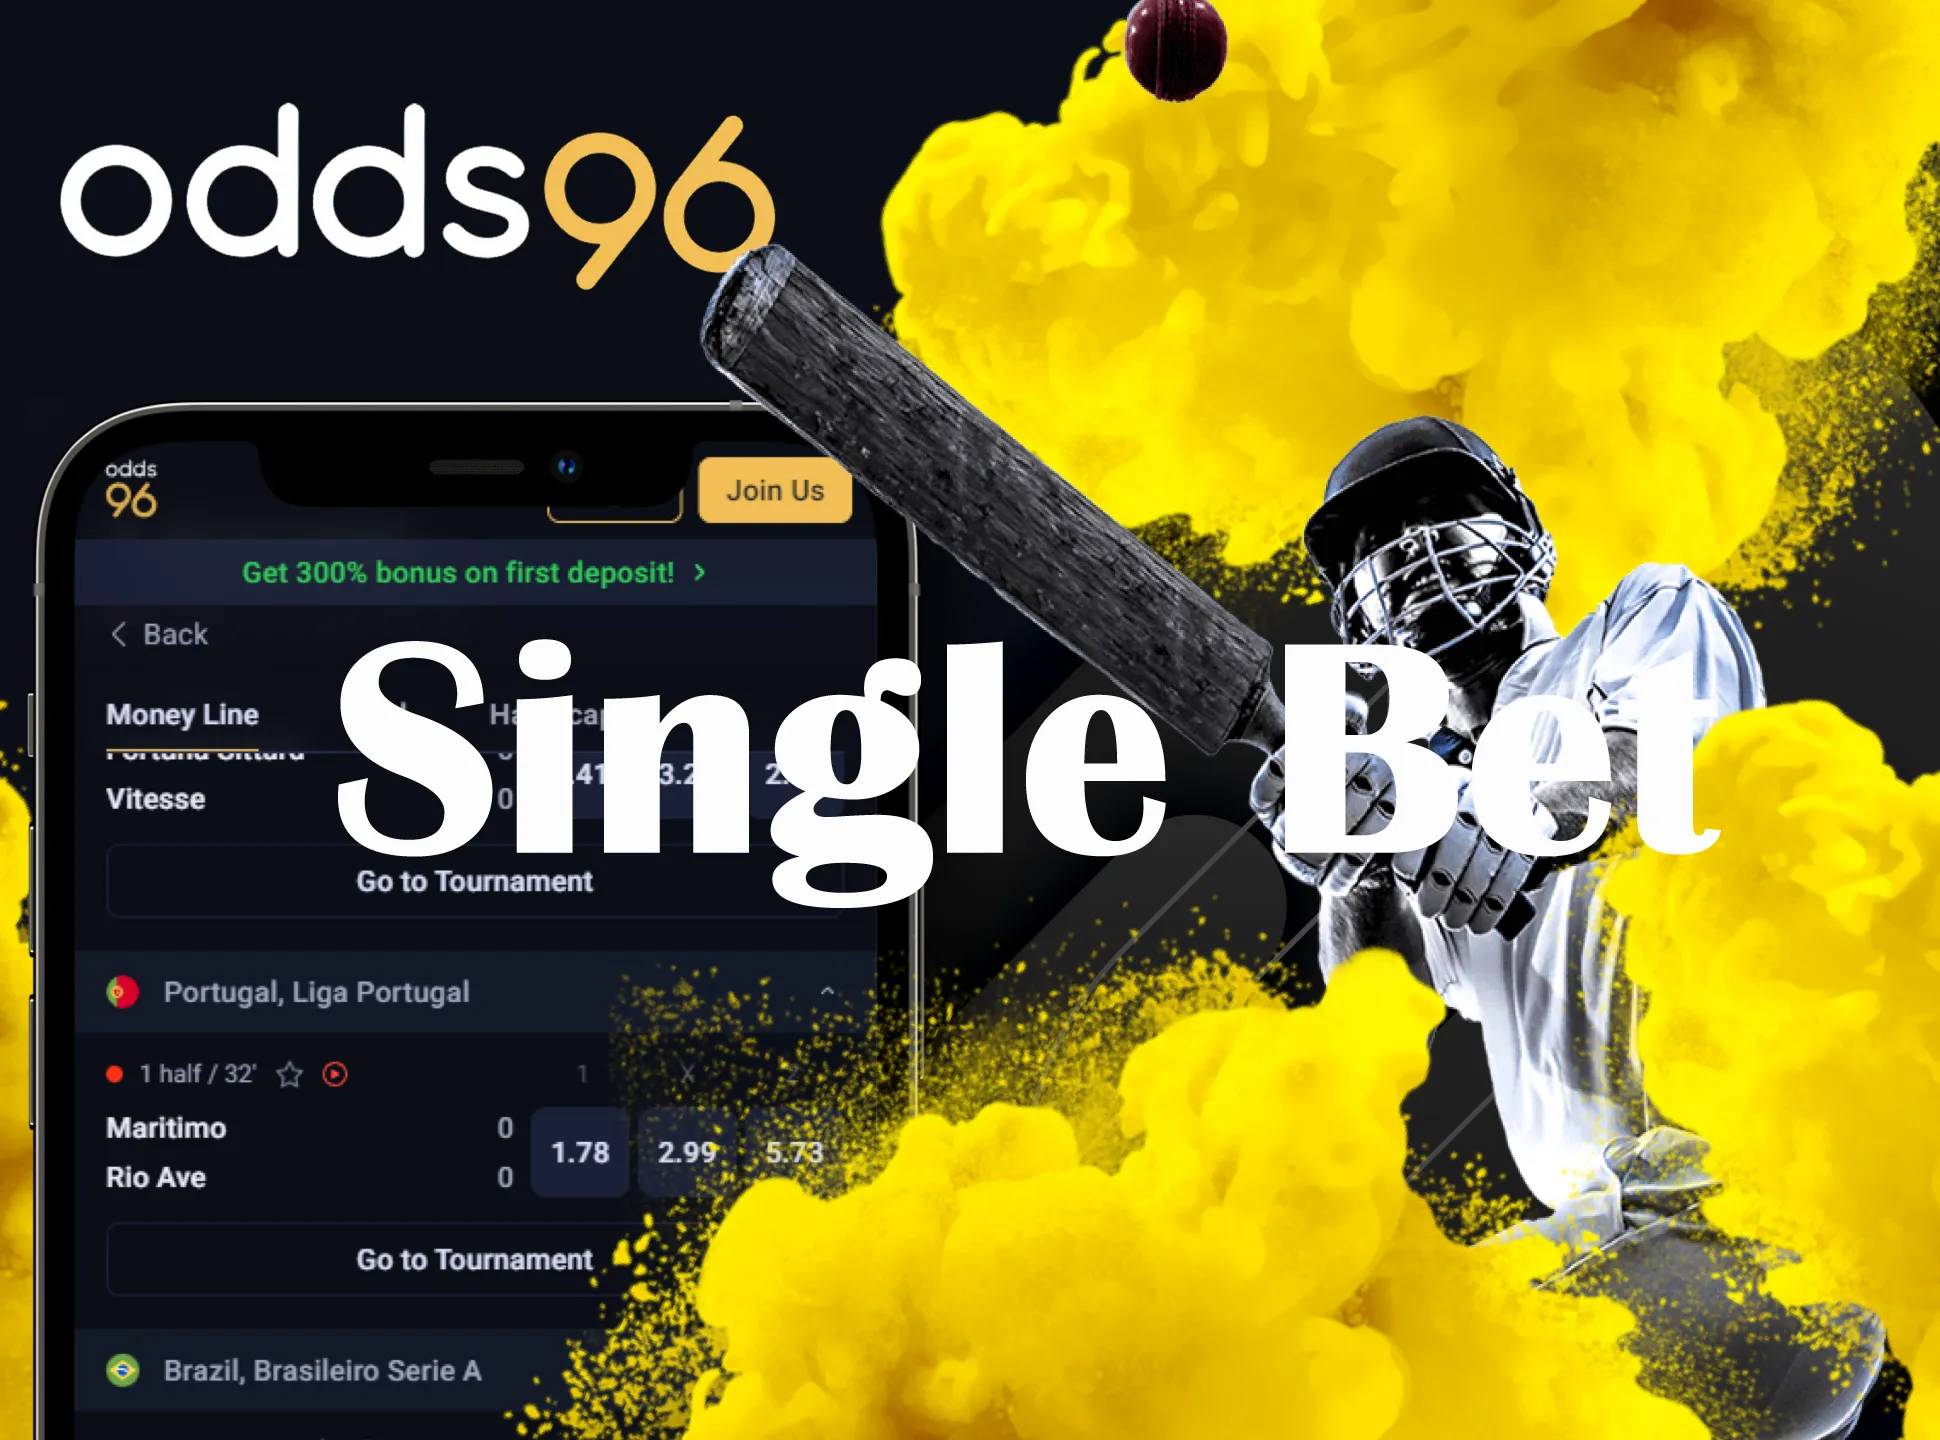 Make single bets on multiple matches at Odds96.